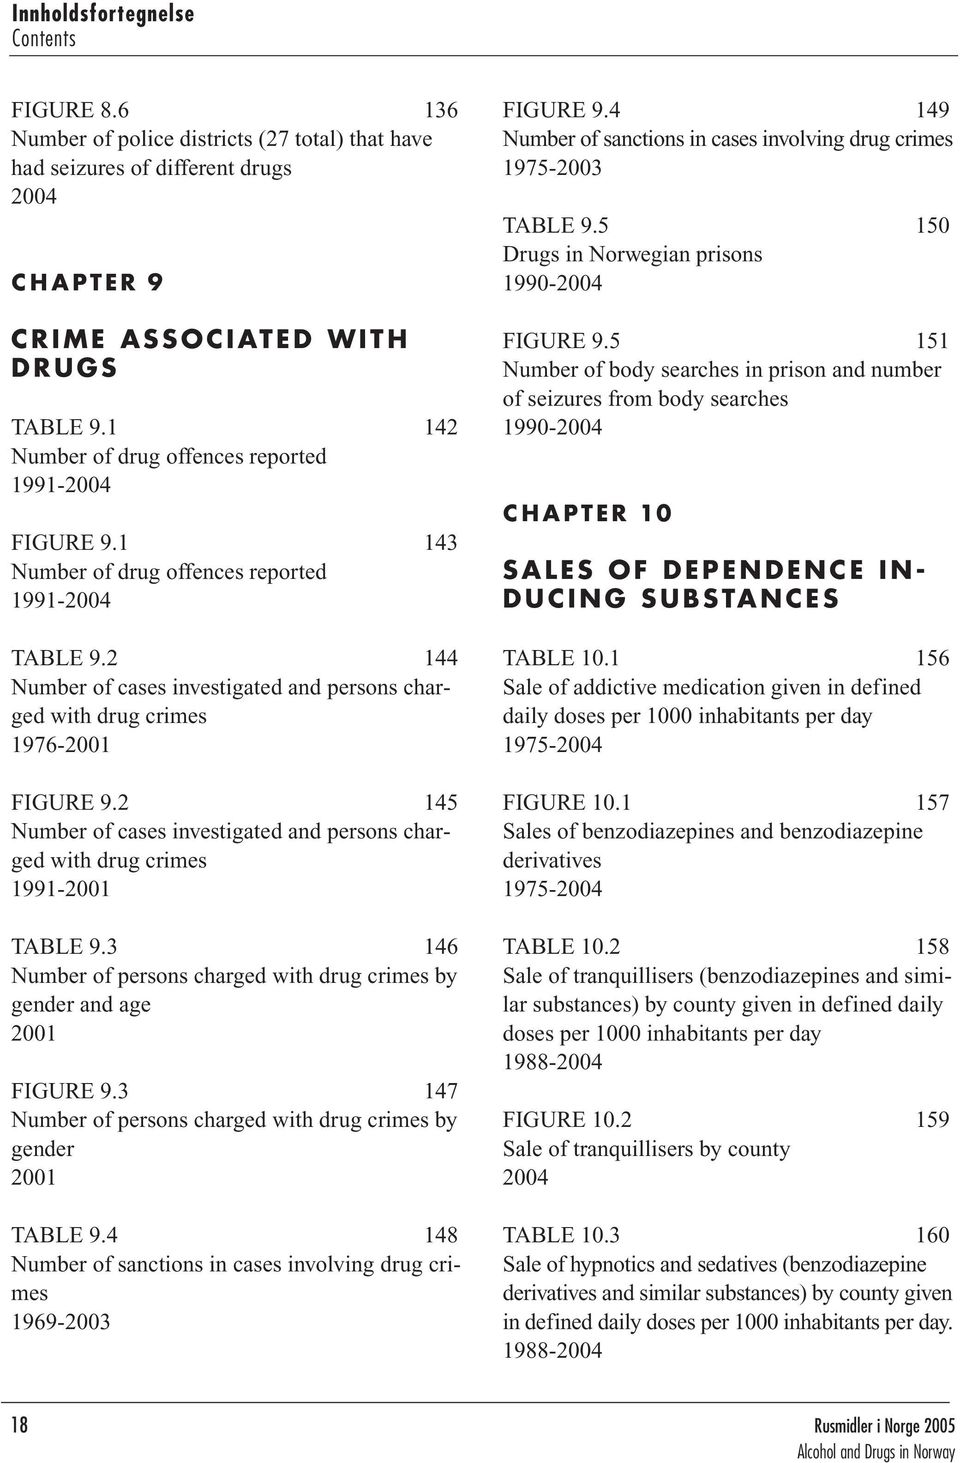 2 144 Number of cases investigated and persons charged with drug crimes 1976-2001 FIGURE 9.2 145 Number of cases investigated and persons charged with drug crimes 1991-2001 TABLE 9.